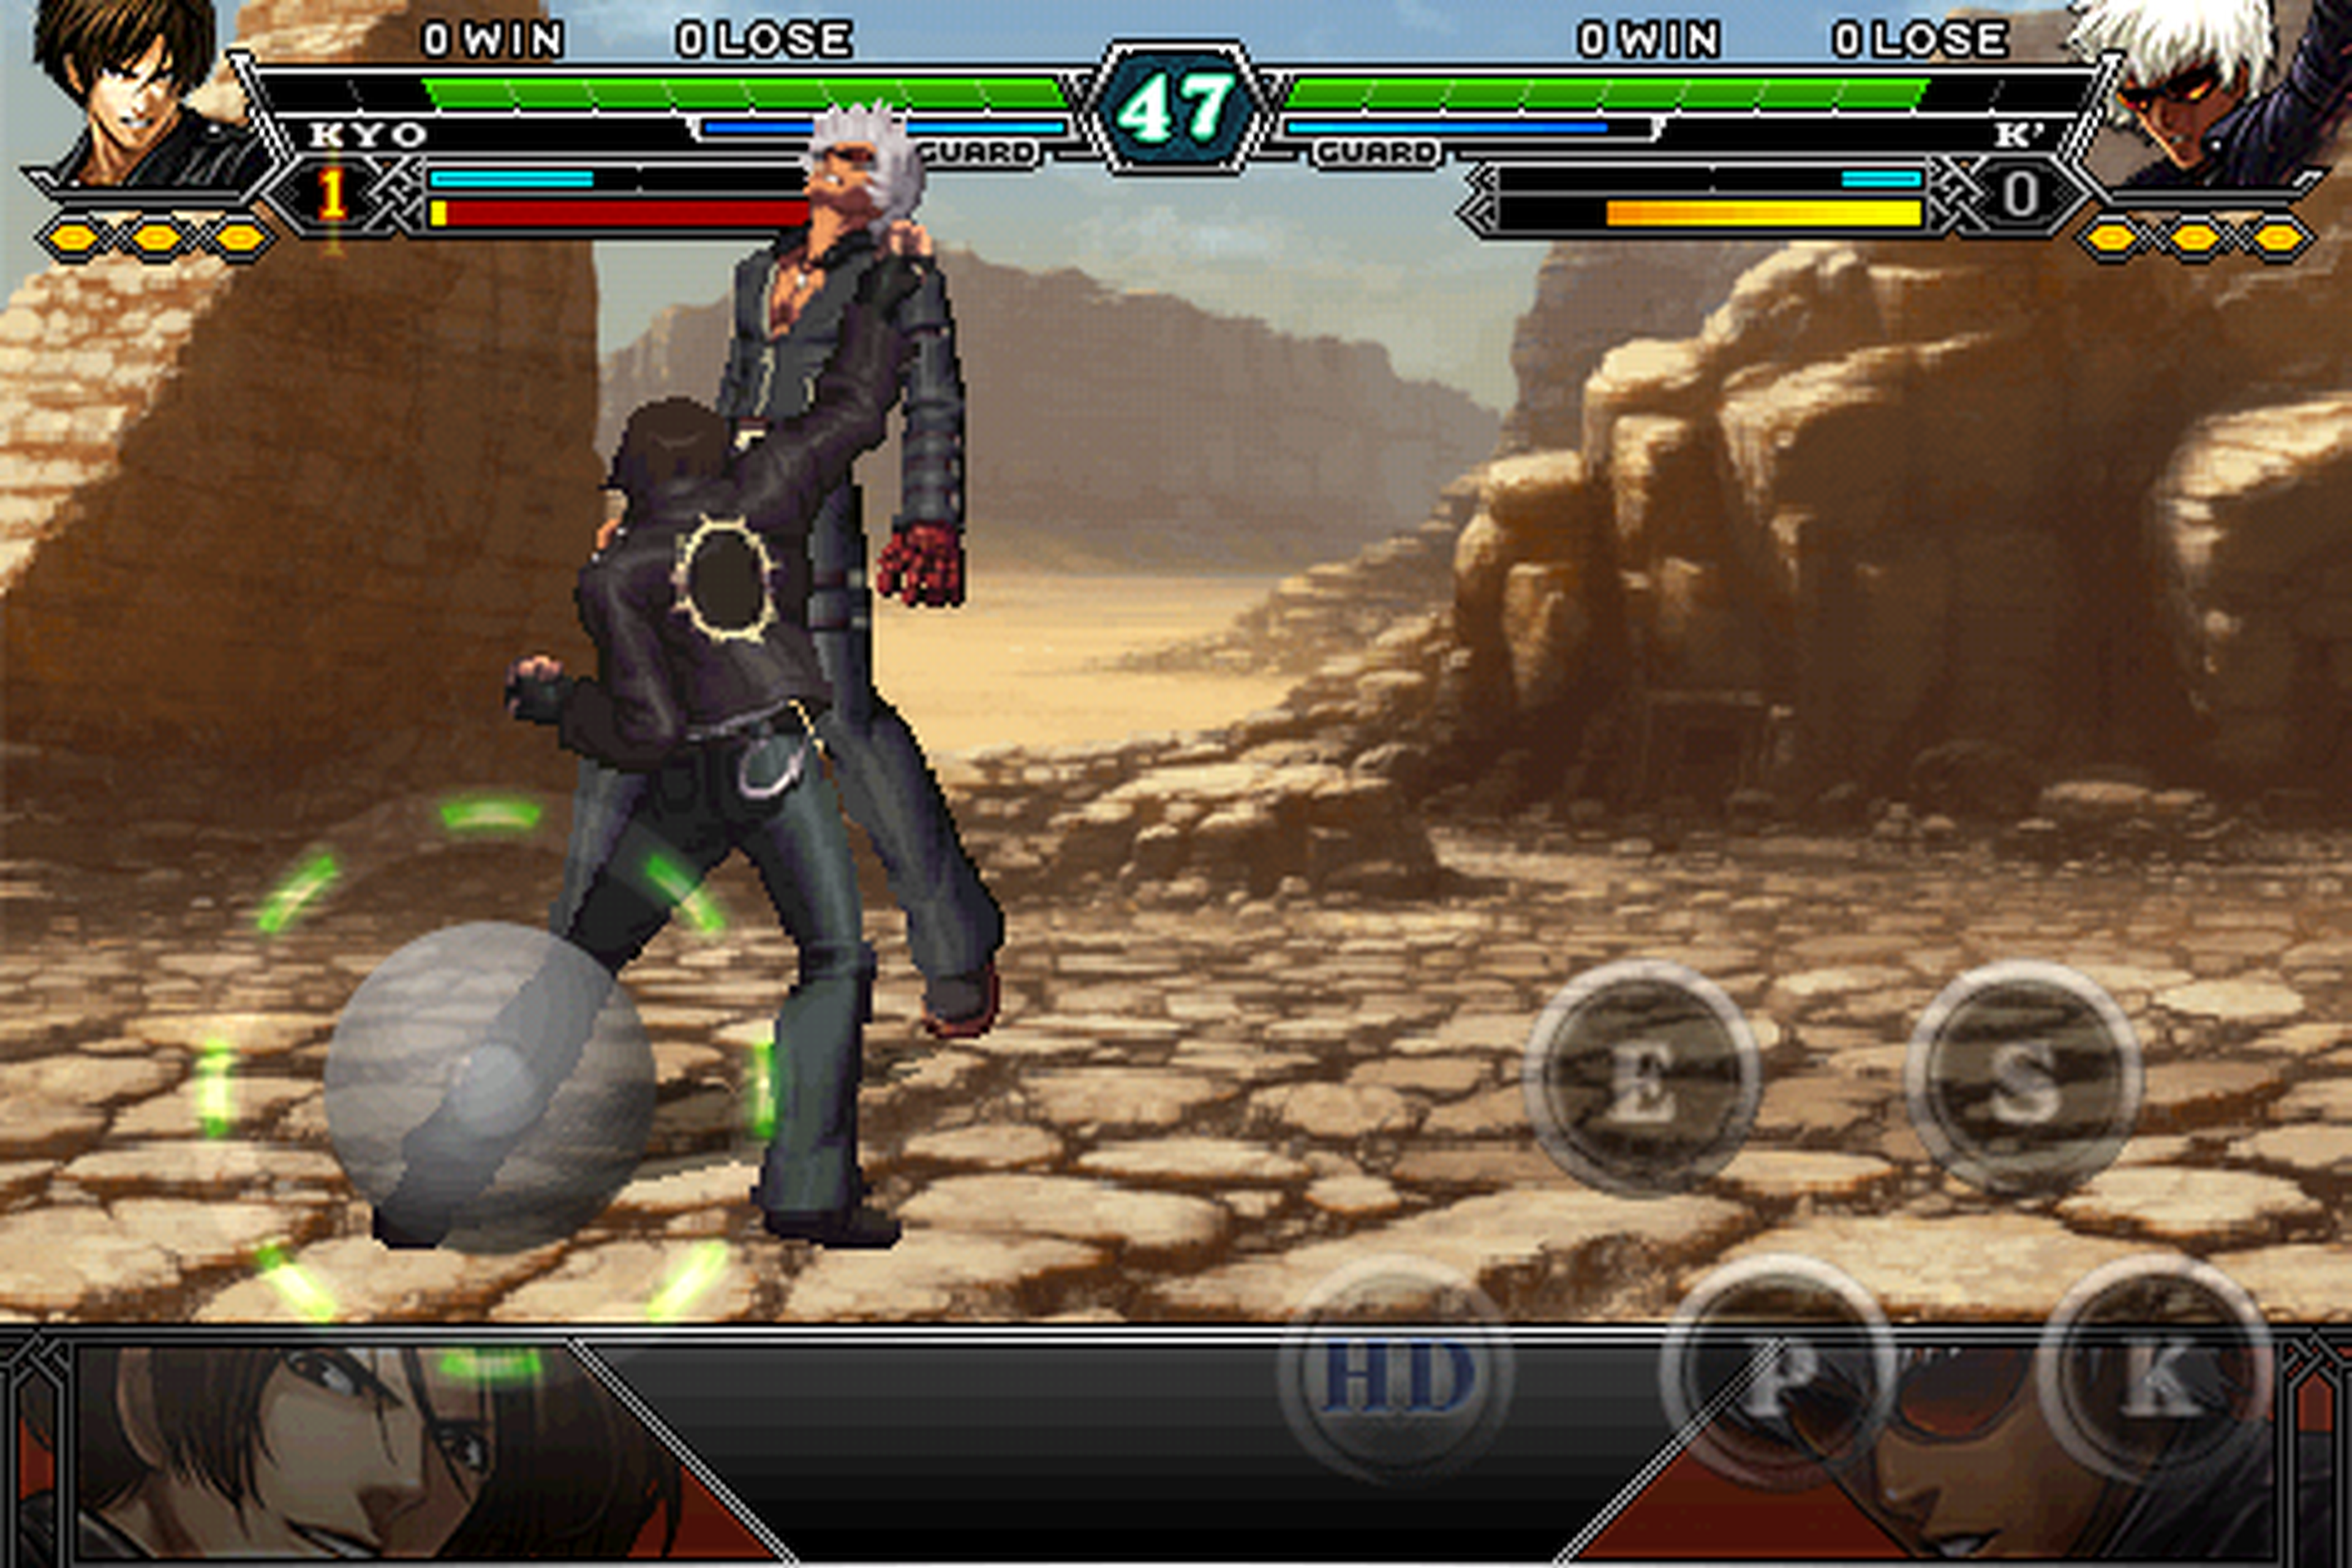 The King of Fighters llega a iOS